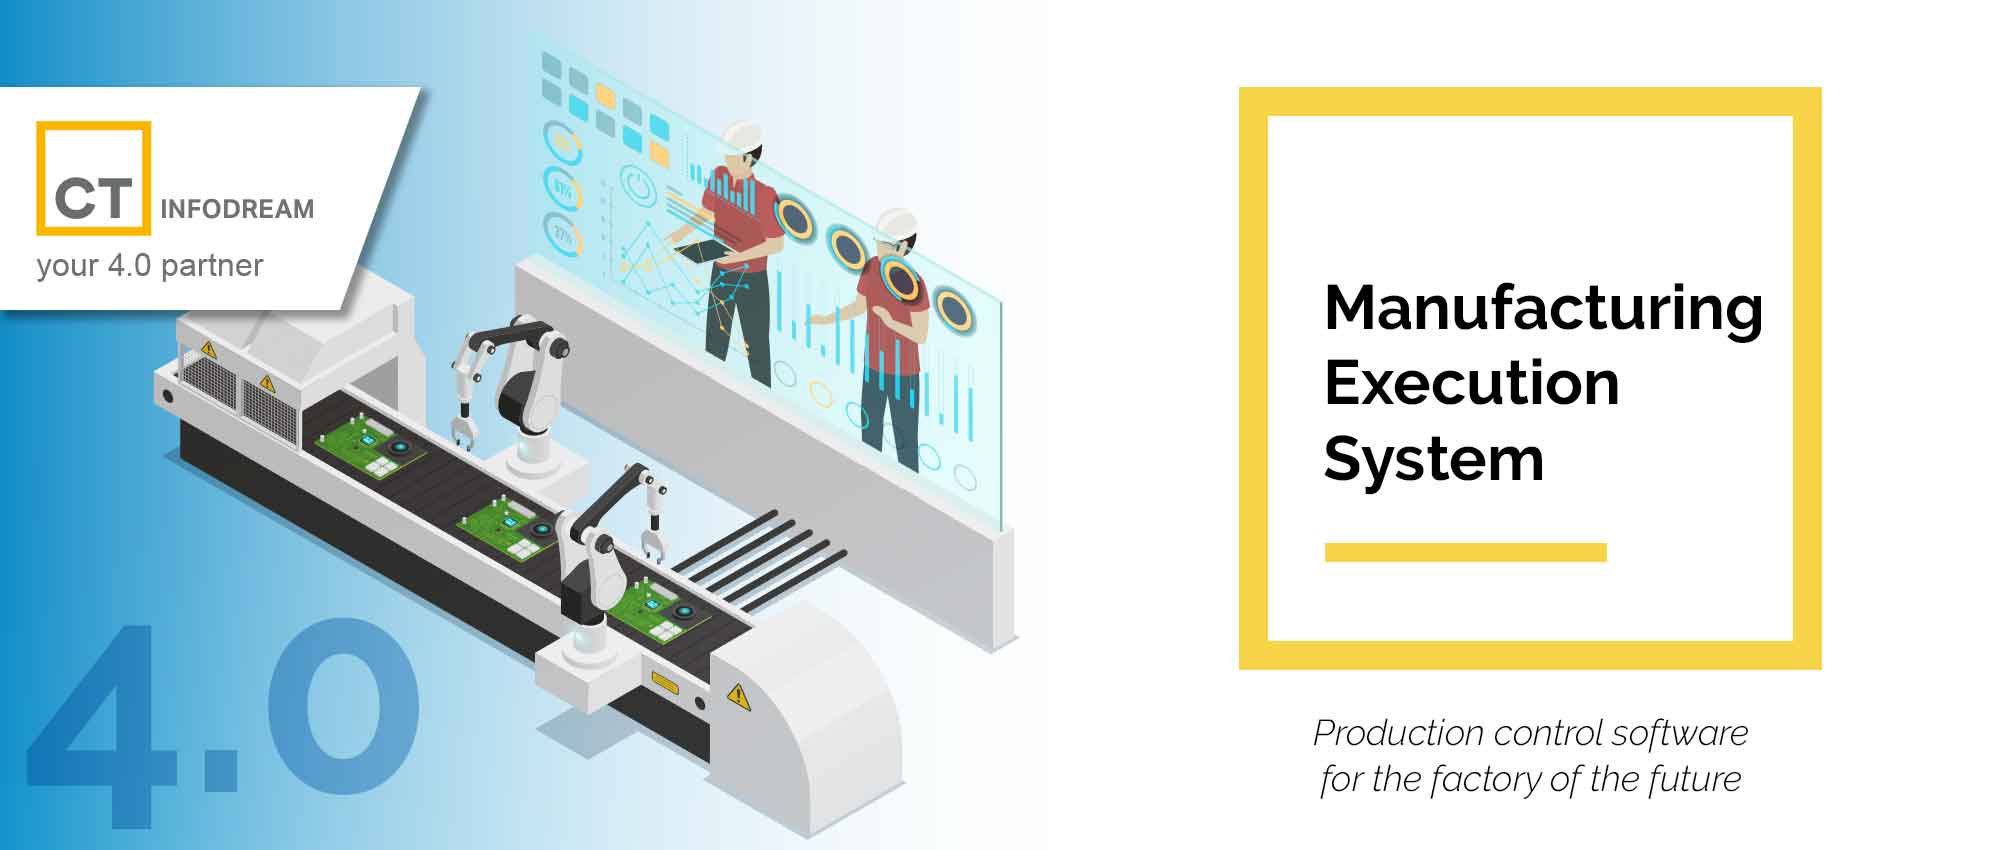 MES (Manufacturing Execution System) software is a production control software for Industry 4.0